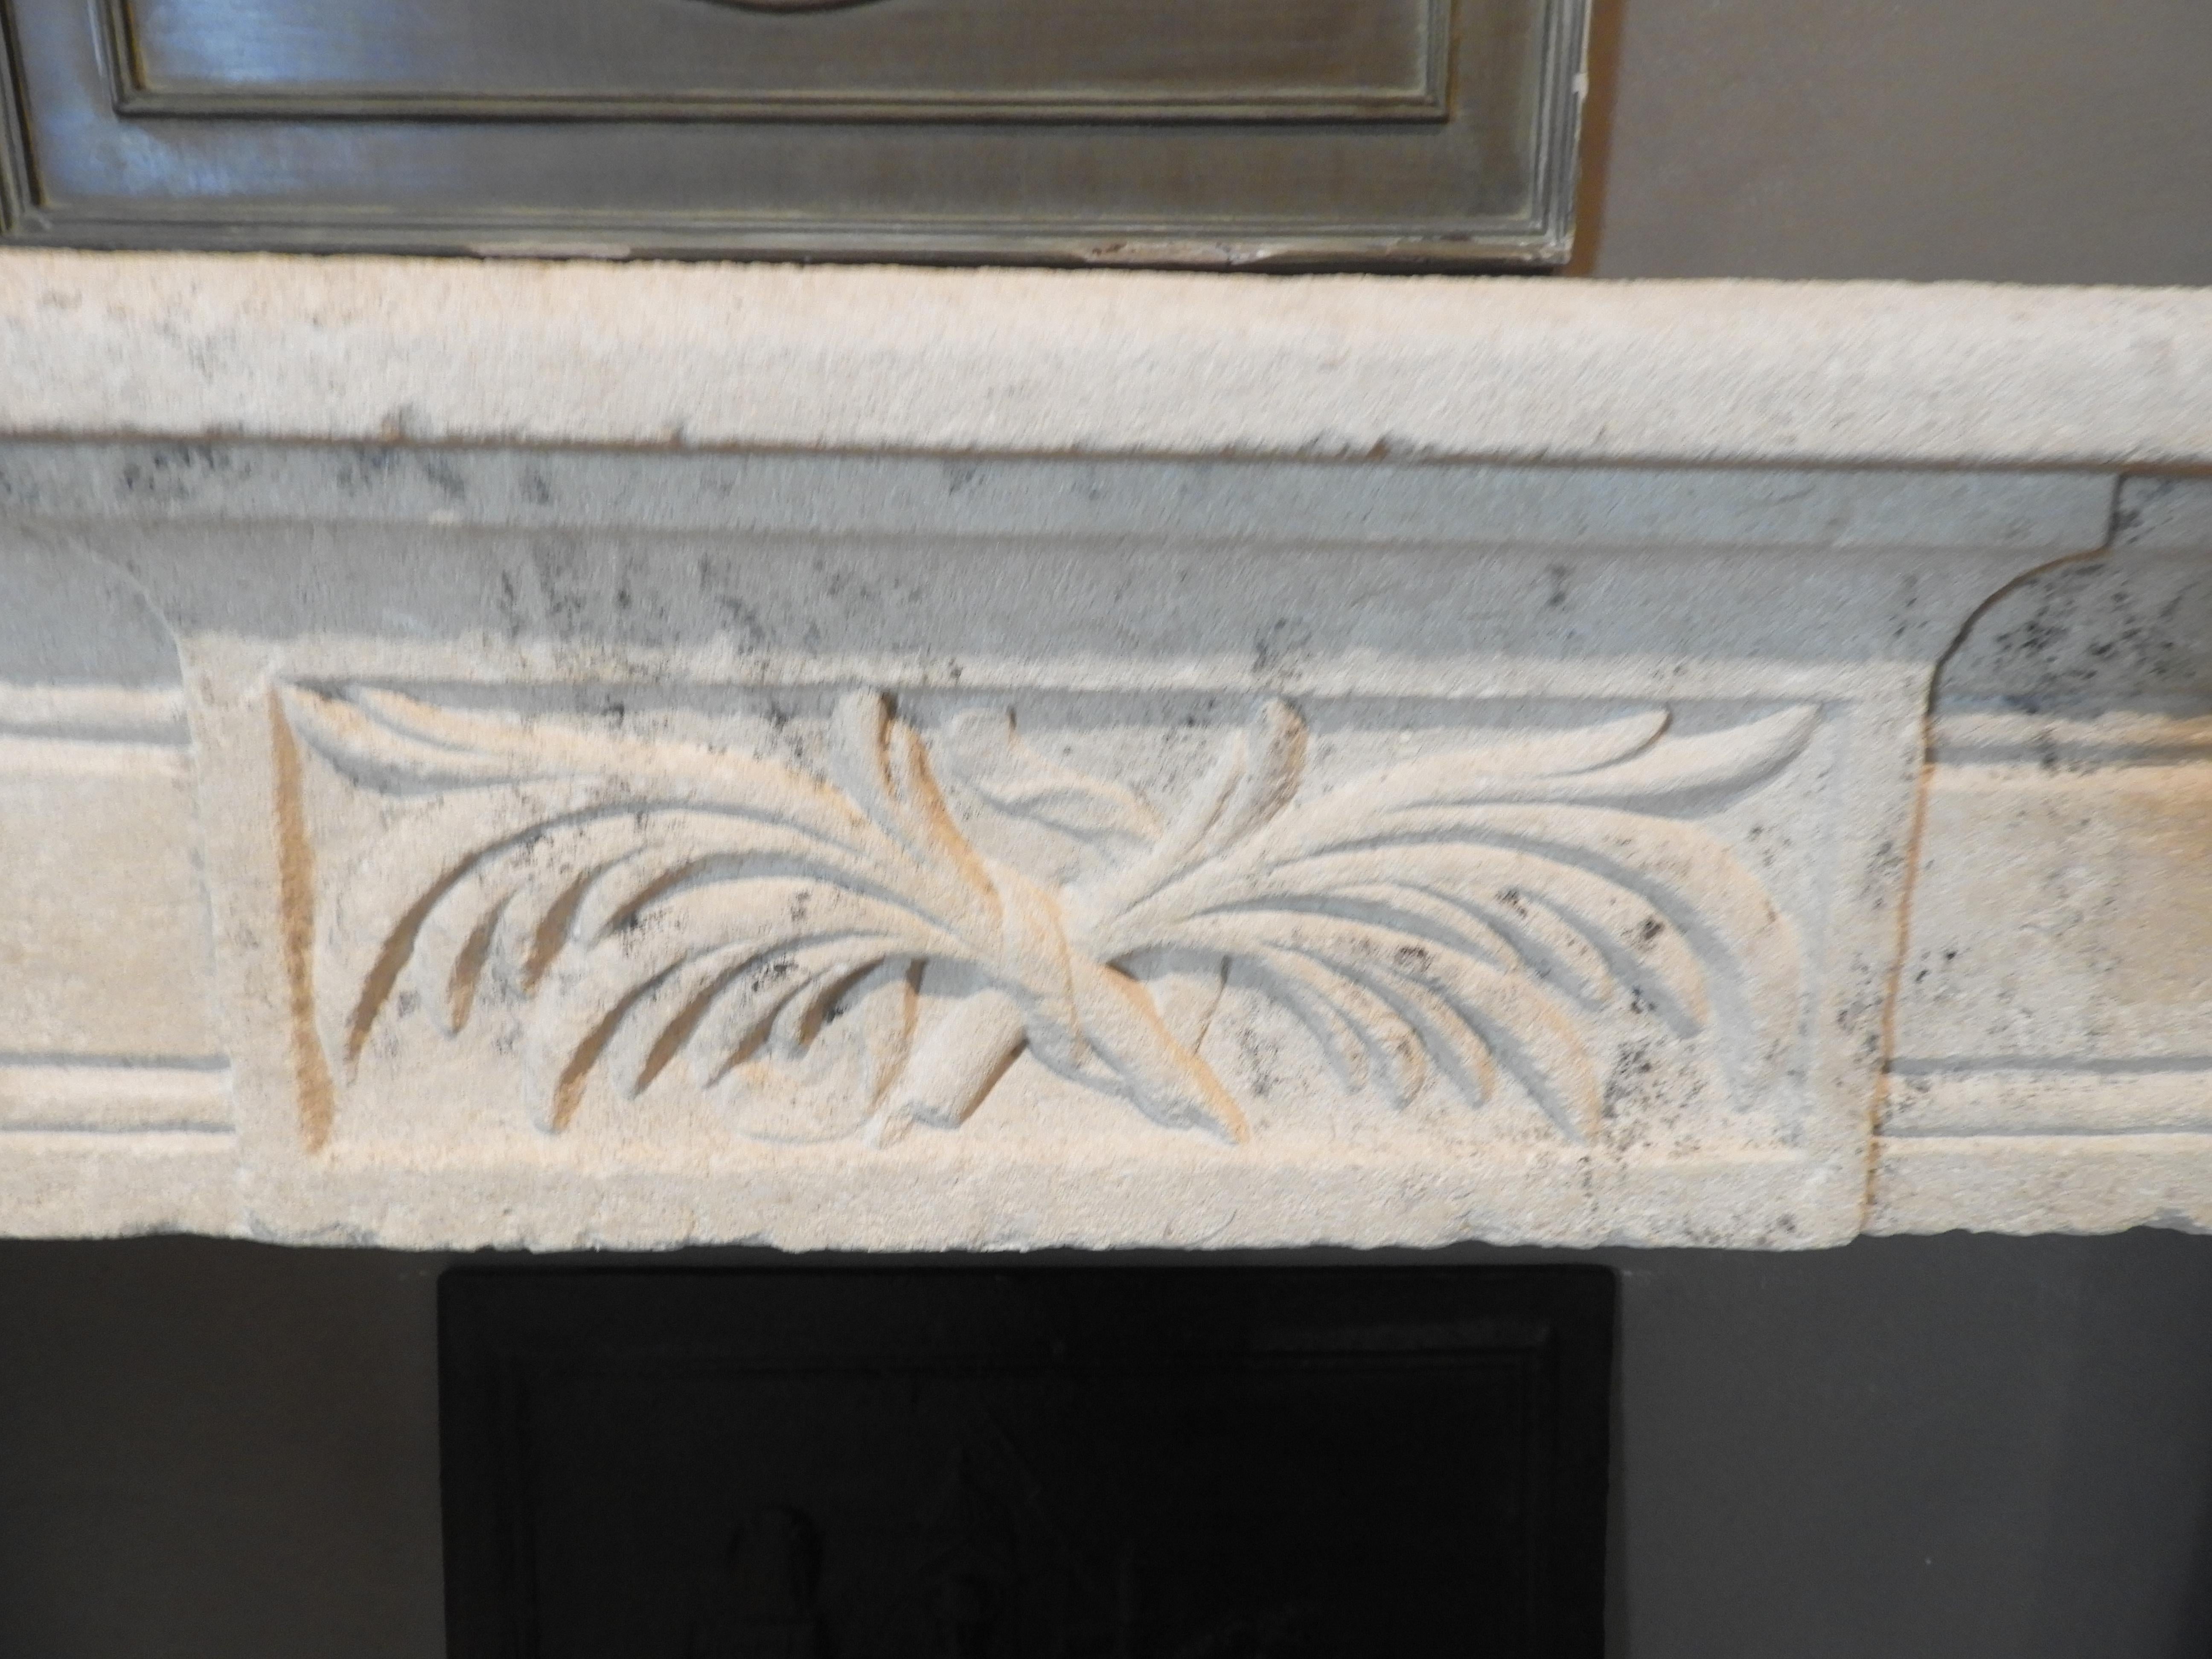 18th century Louis XVI fireplace in French limestone with a nice warn look.
The interior sizes are: 130 cm wide x 95 cm high.